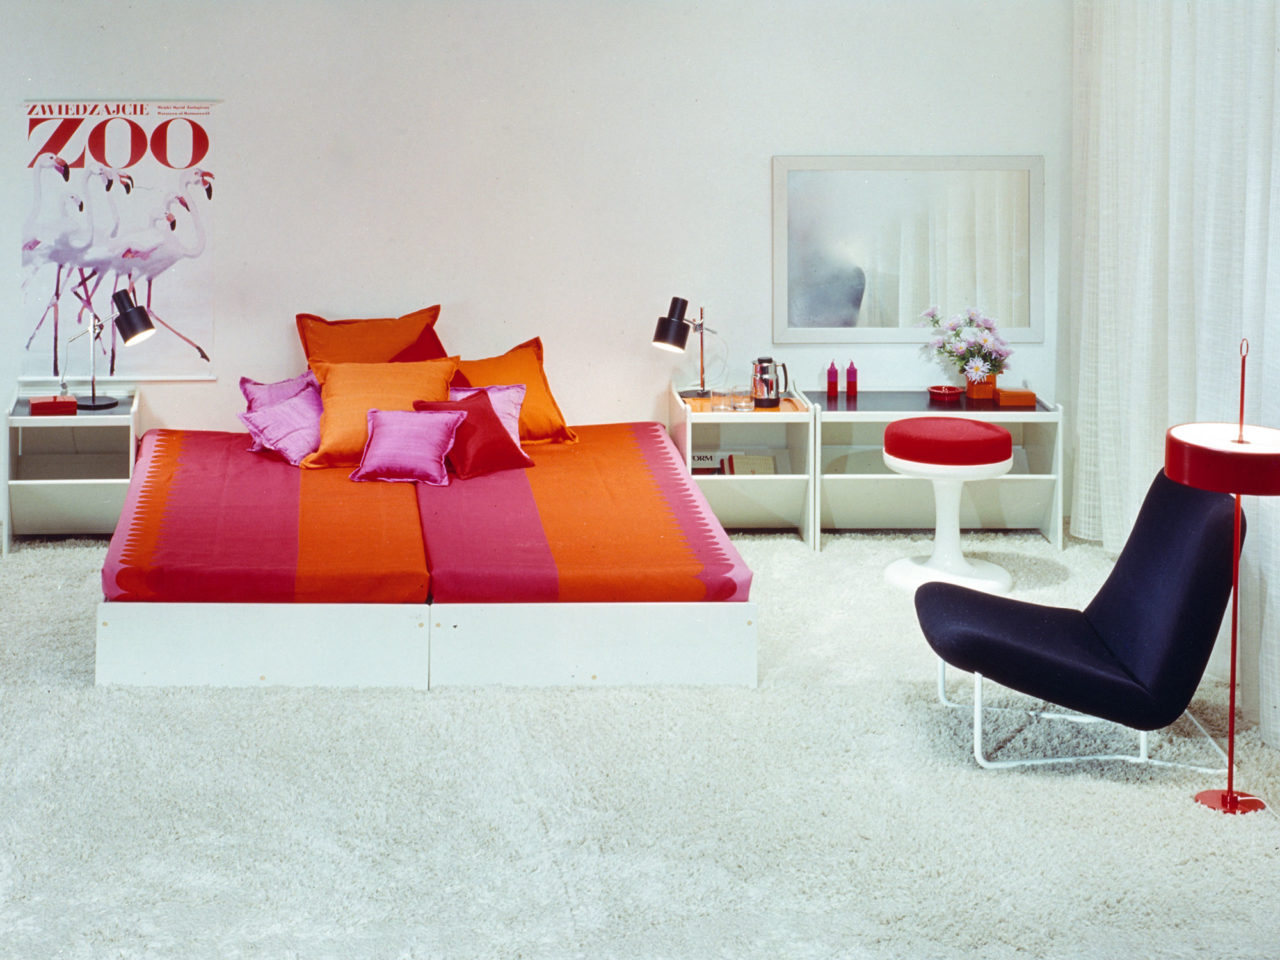 A bedroom in white with colourful details, crowned by a HEPP bed, with textiles in sweet-wrapper-like pink and orange.